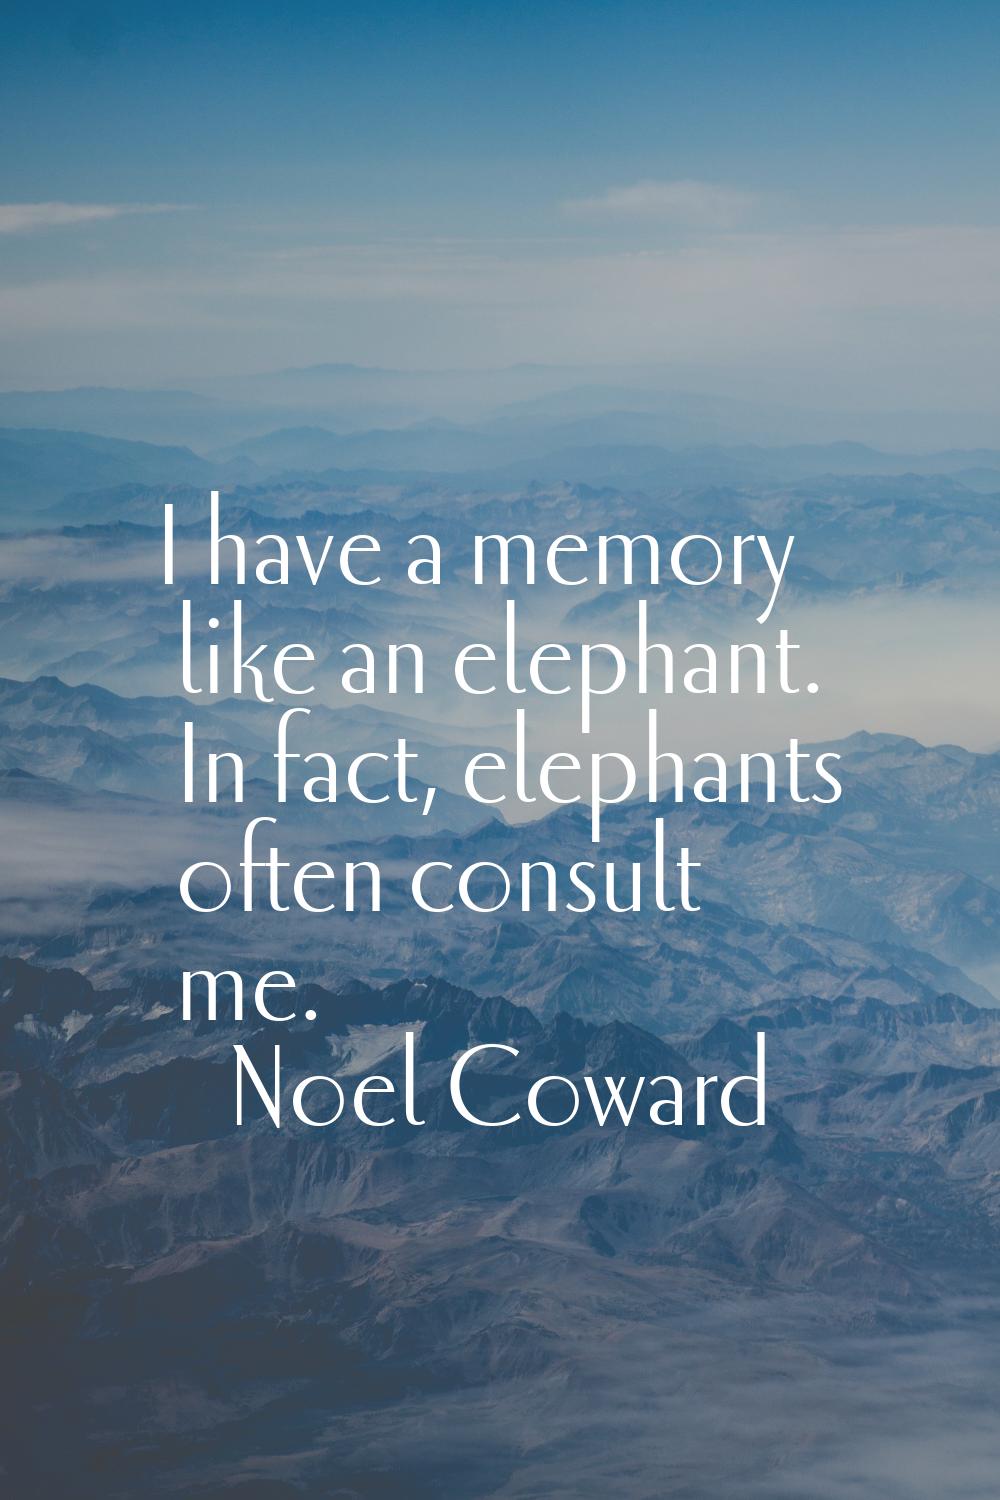 I have a memory like an elephant. In fact, elephants often consult me.